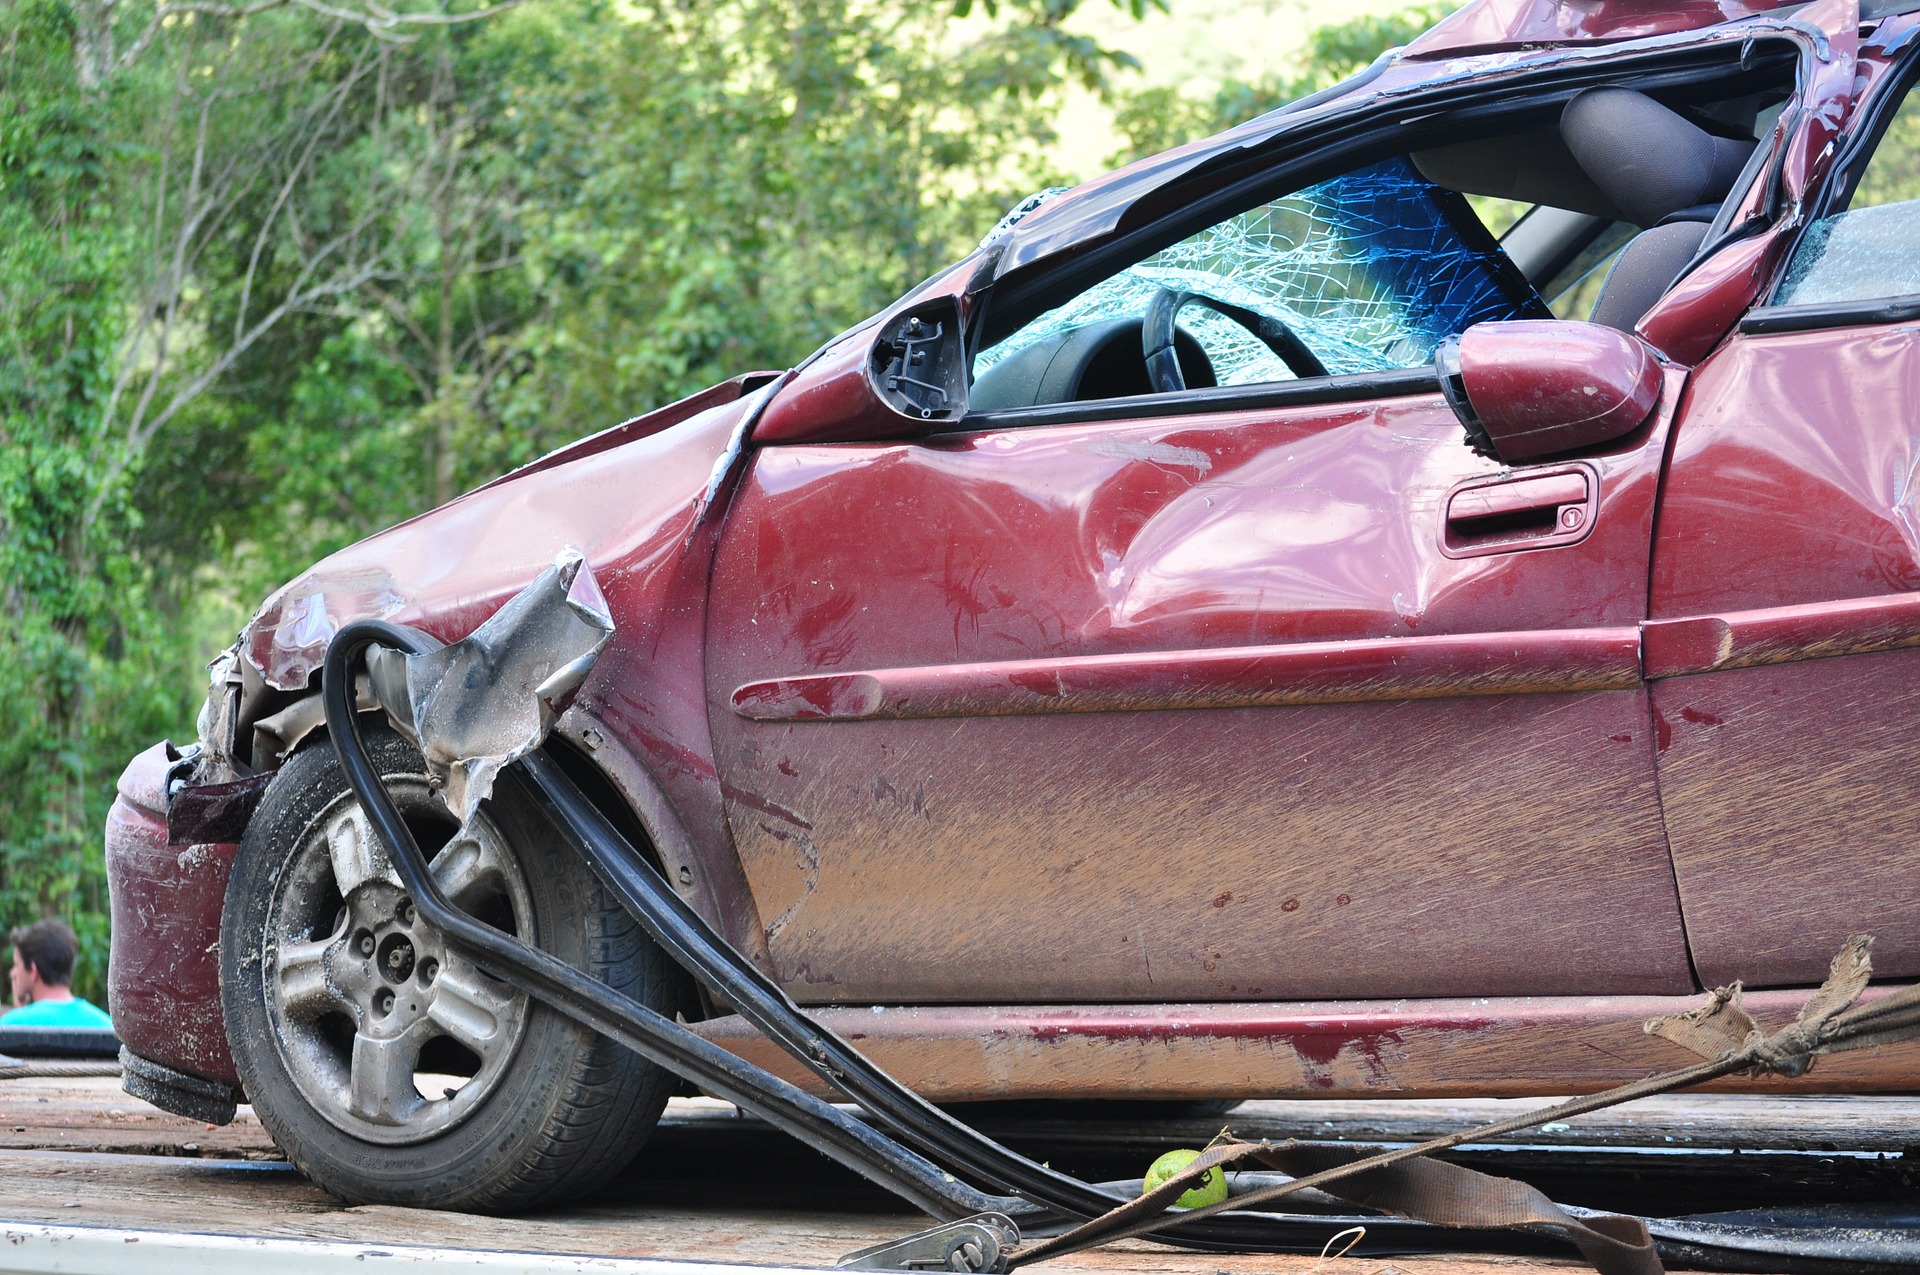 TOP 4 THINGS TO DO AFTER A CAR CRASH